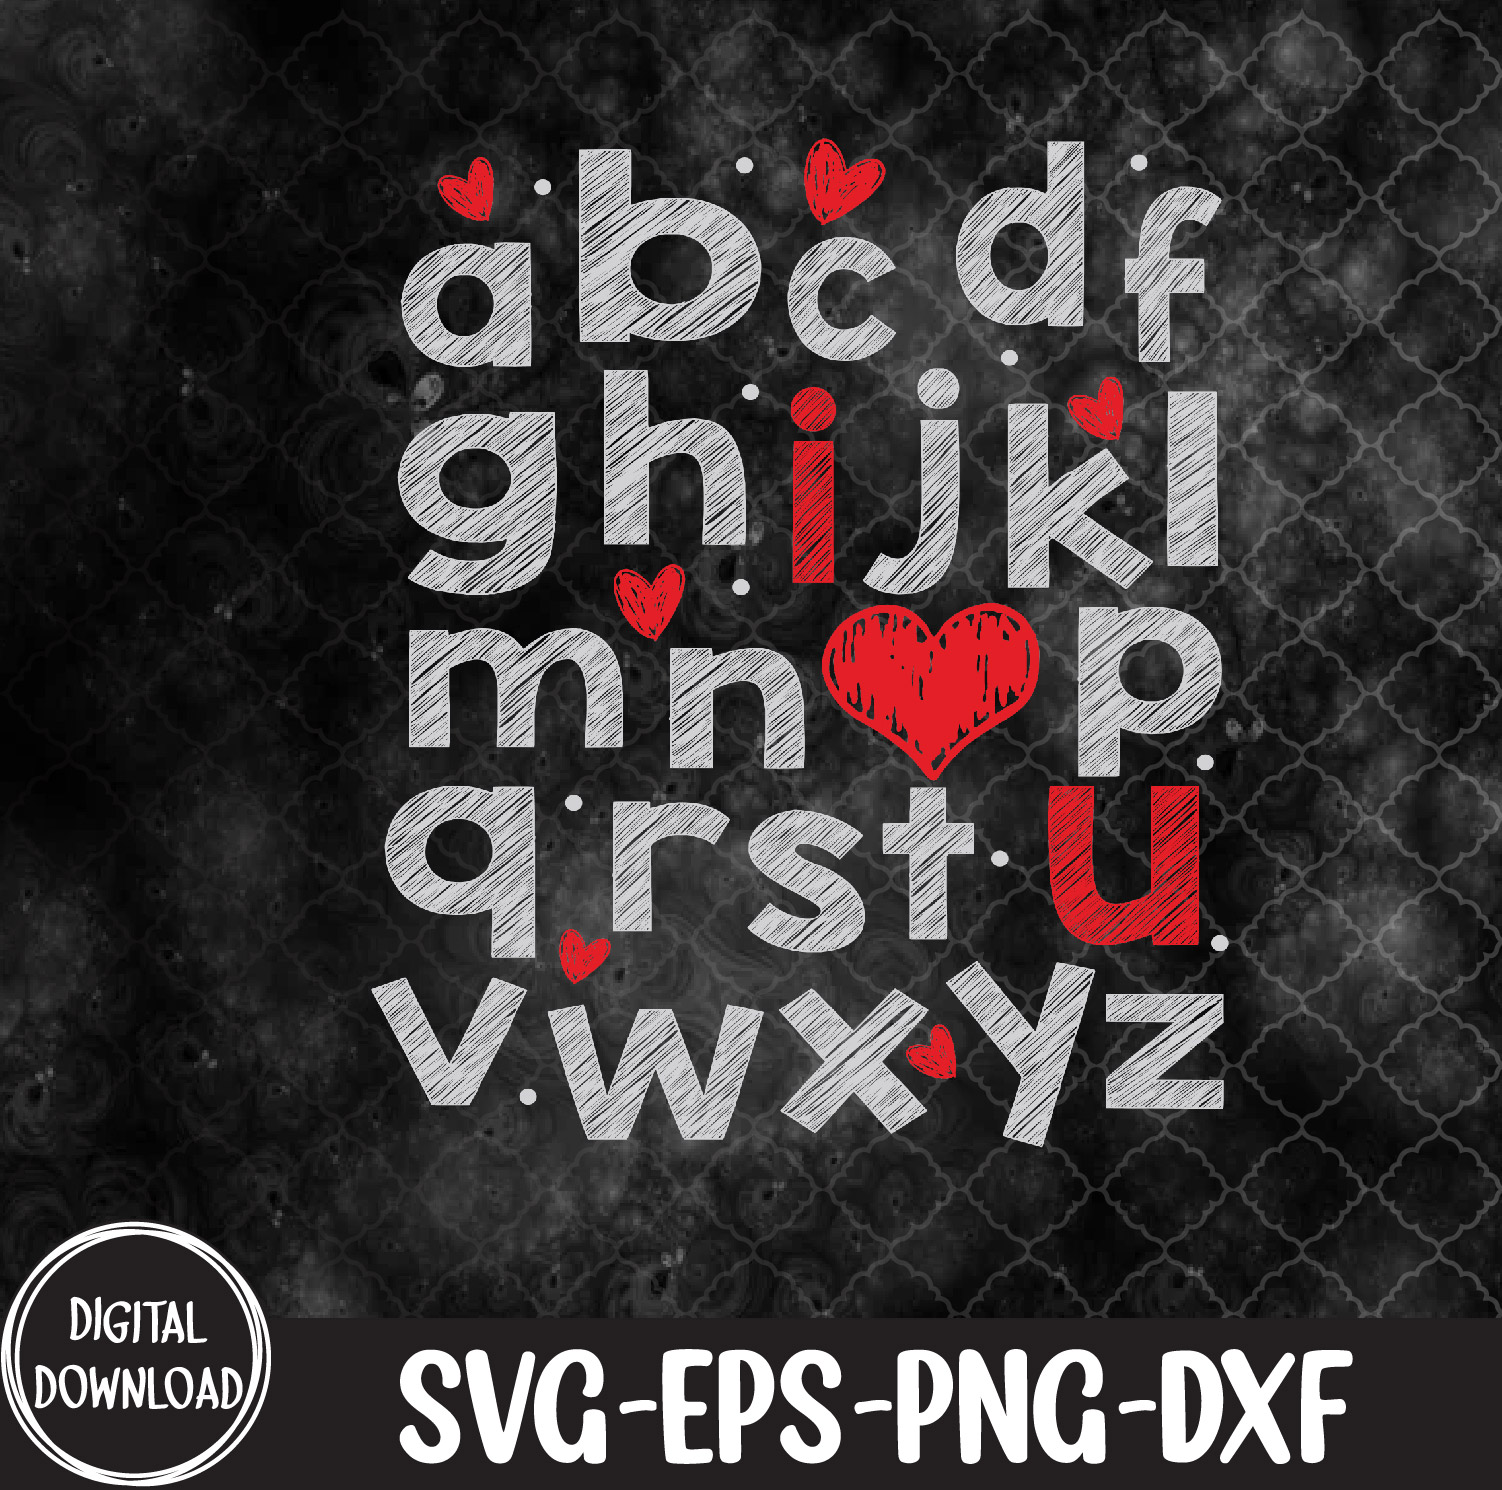 WTMNEW9file 09 7 Alphabet I Love You English Teacher Valentines Day svg, Svg, Eps, Png, Dxf